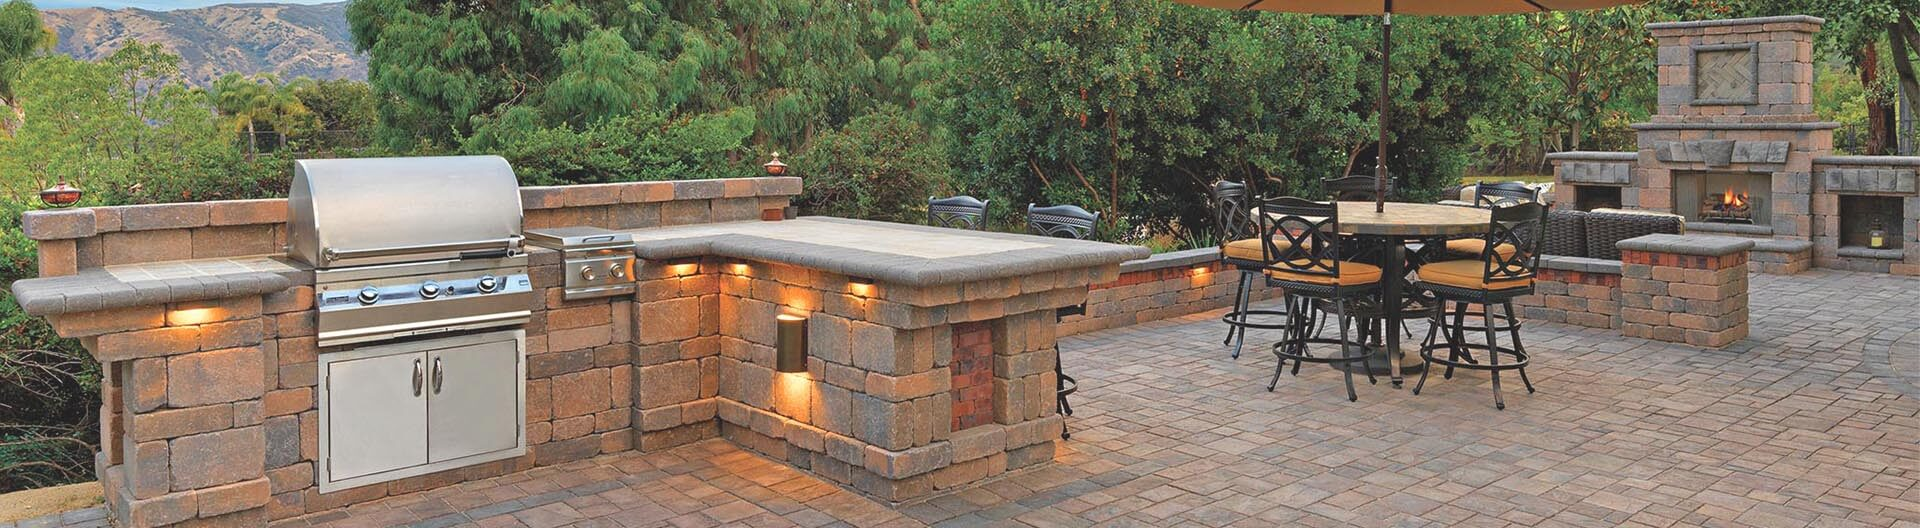 paver patio with grill